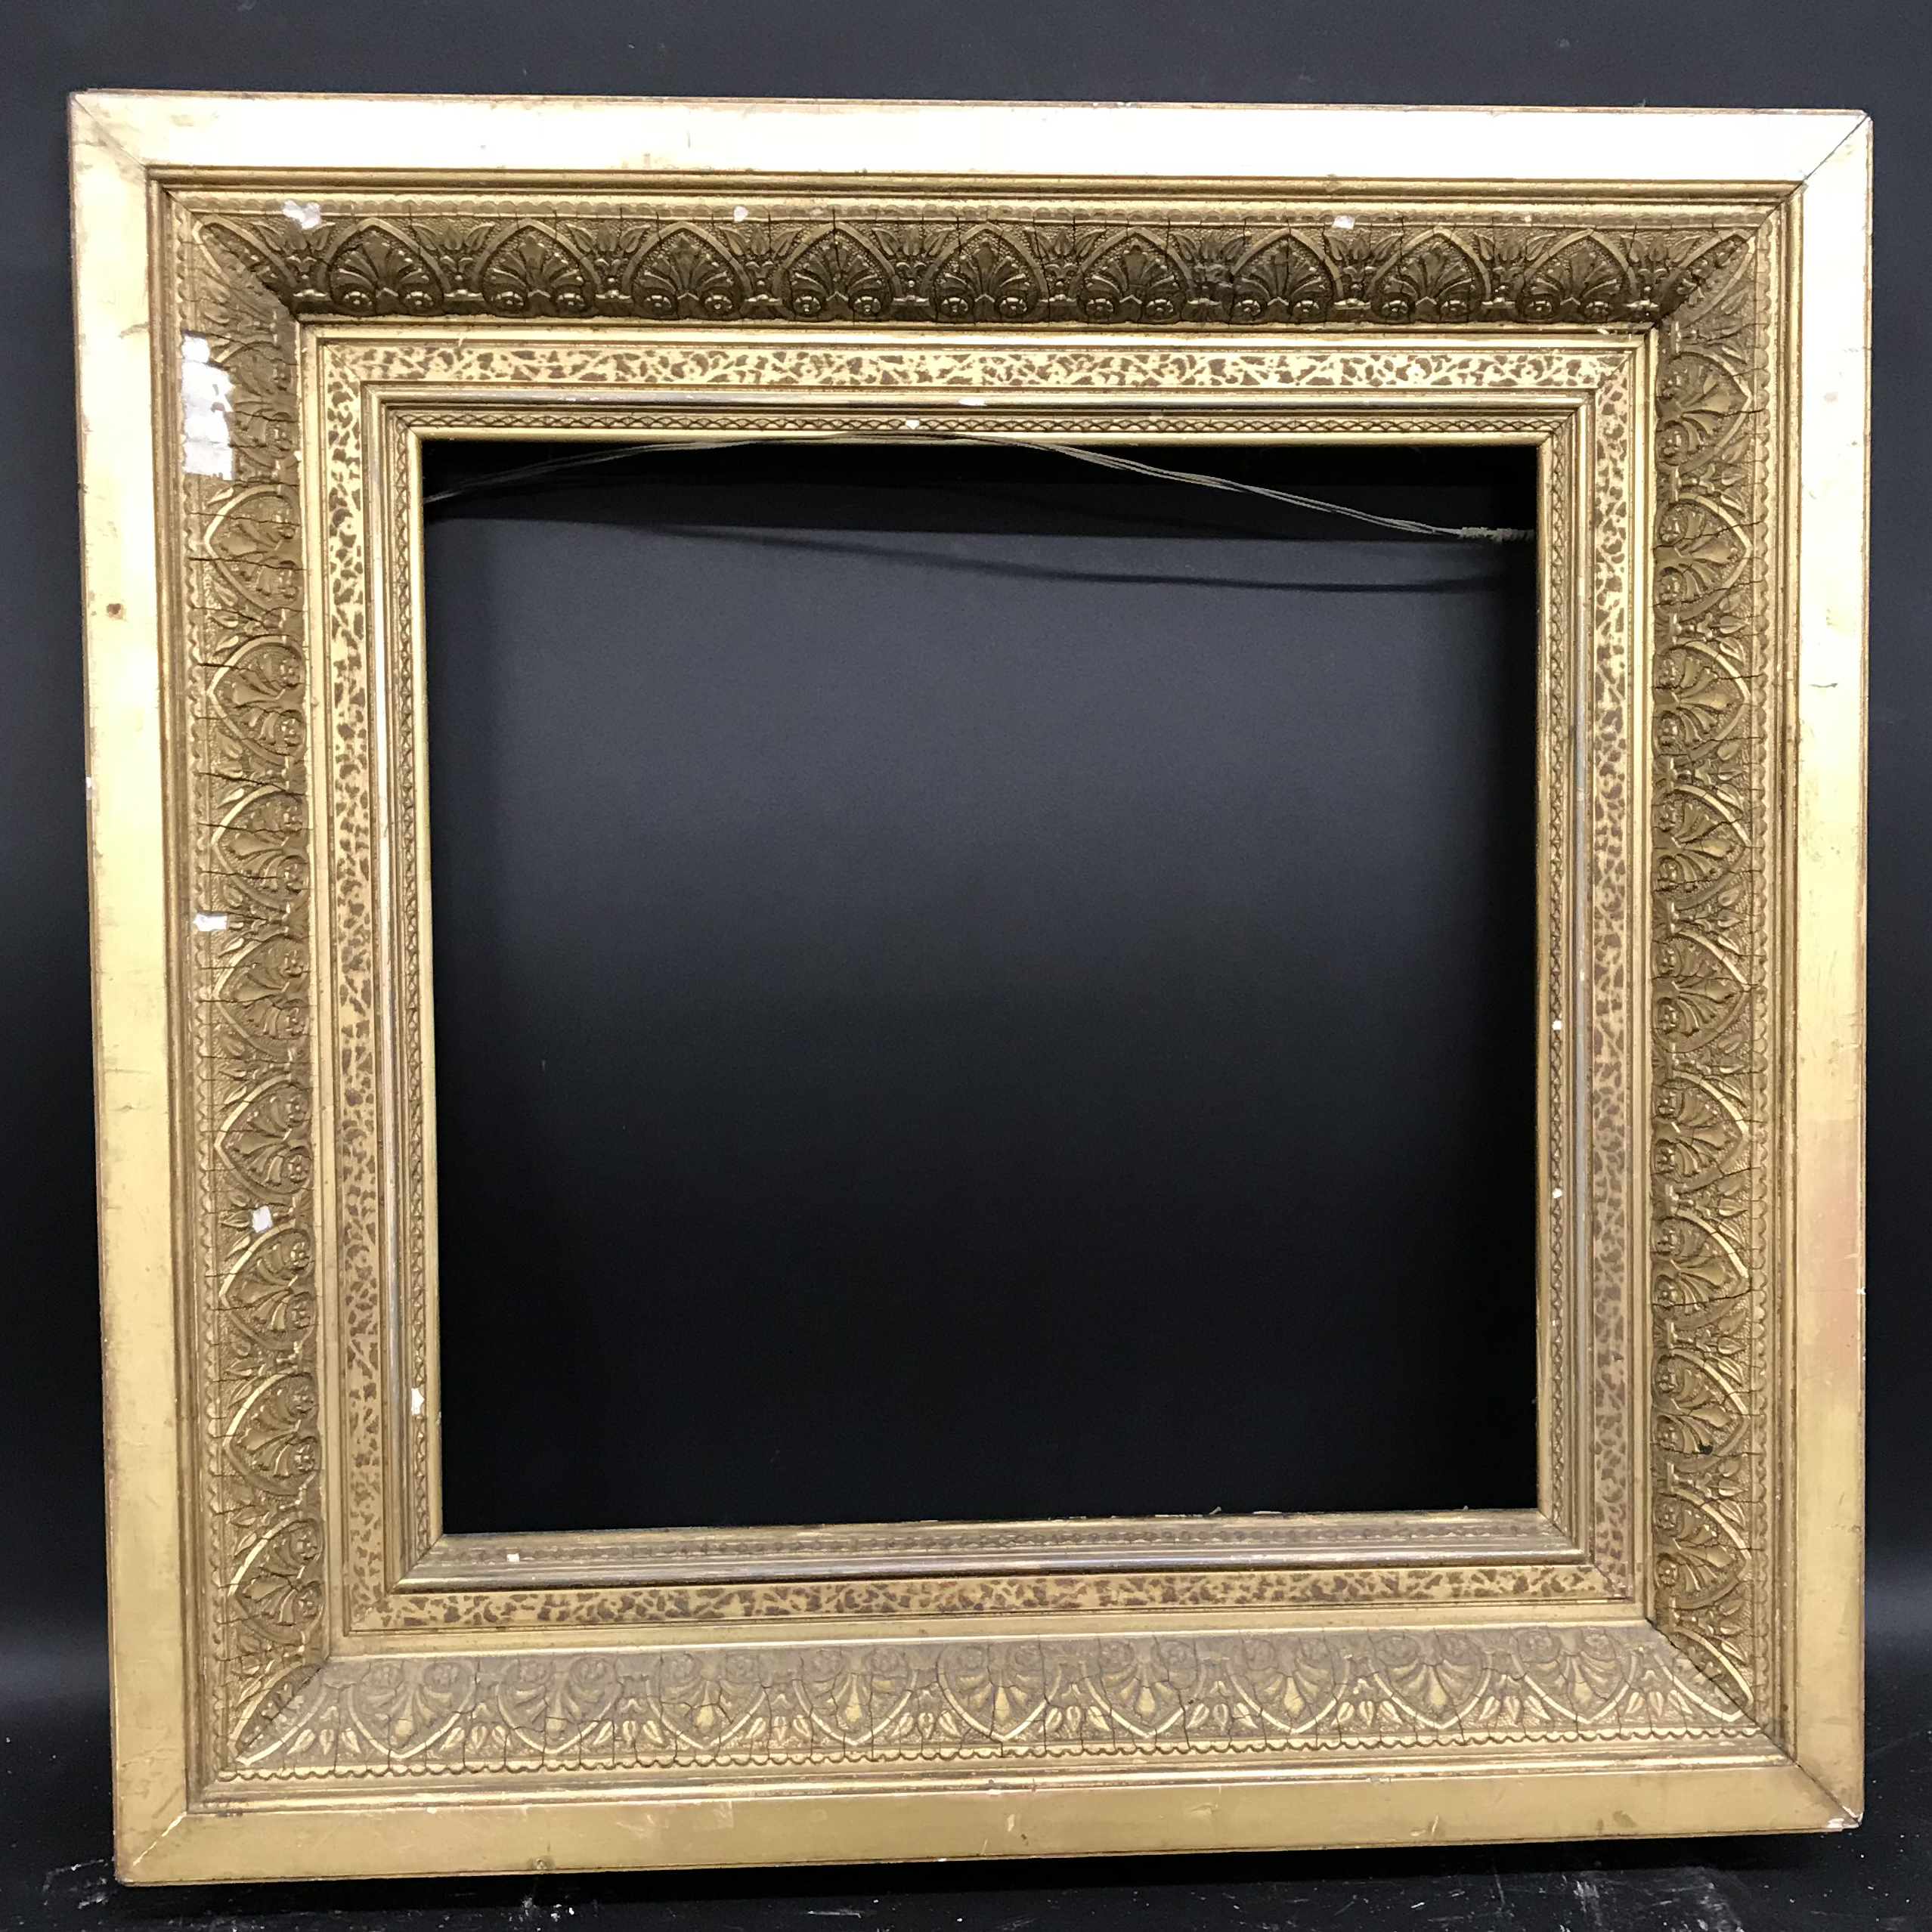 19th Century English School. A Gilt Composition Frame, 15.5" x 15.75" (rebate). - Image 2 of 3